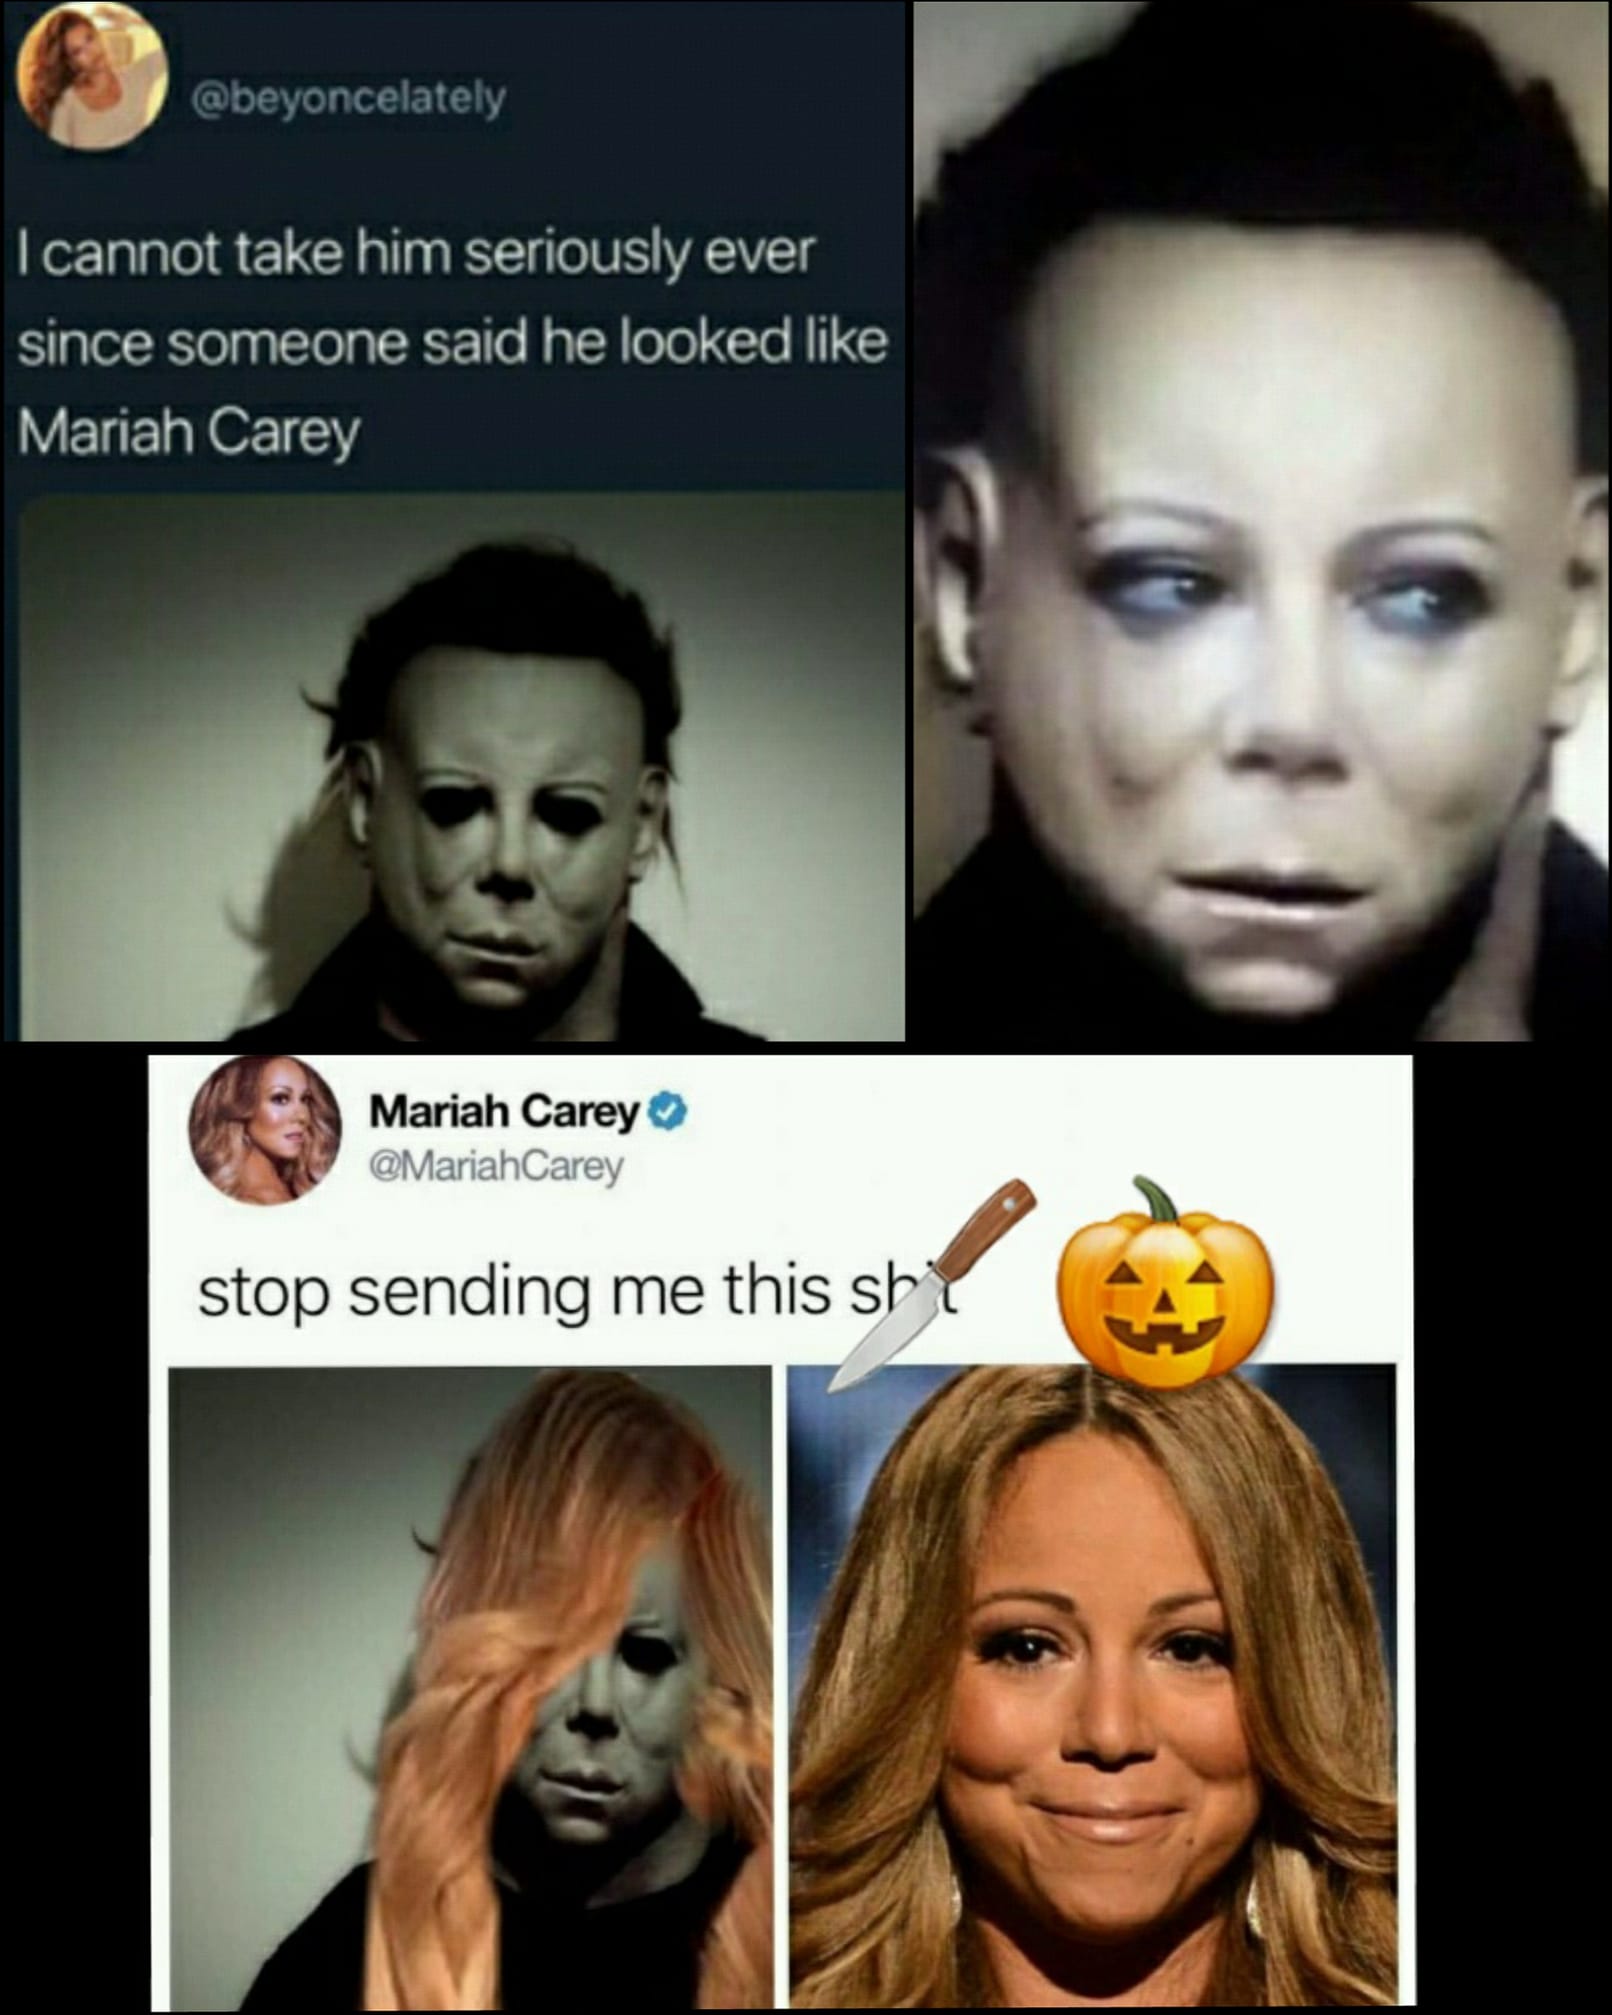 daily dose of randoms - Mariah Carey - I cannot take him seriously ever since someone said he looked Mariah Carey Mariah Carey Carey stop sending me this sh